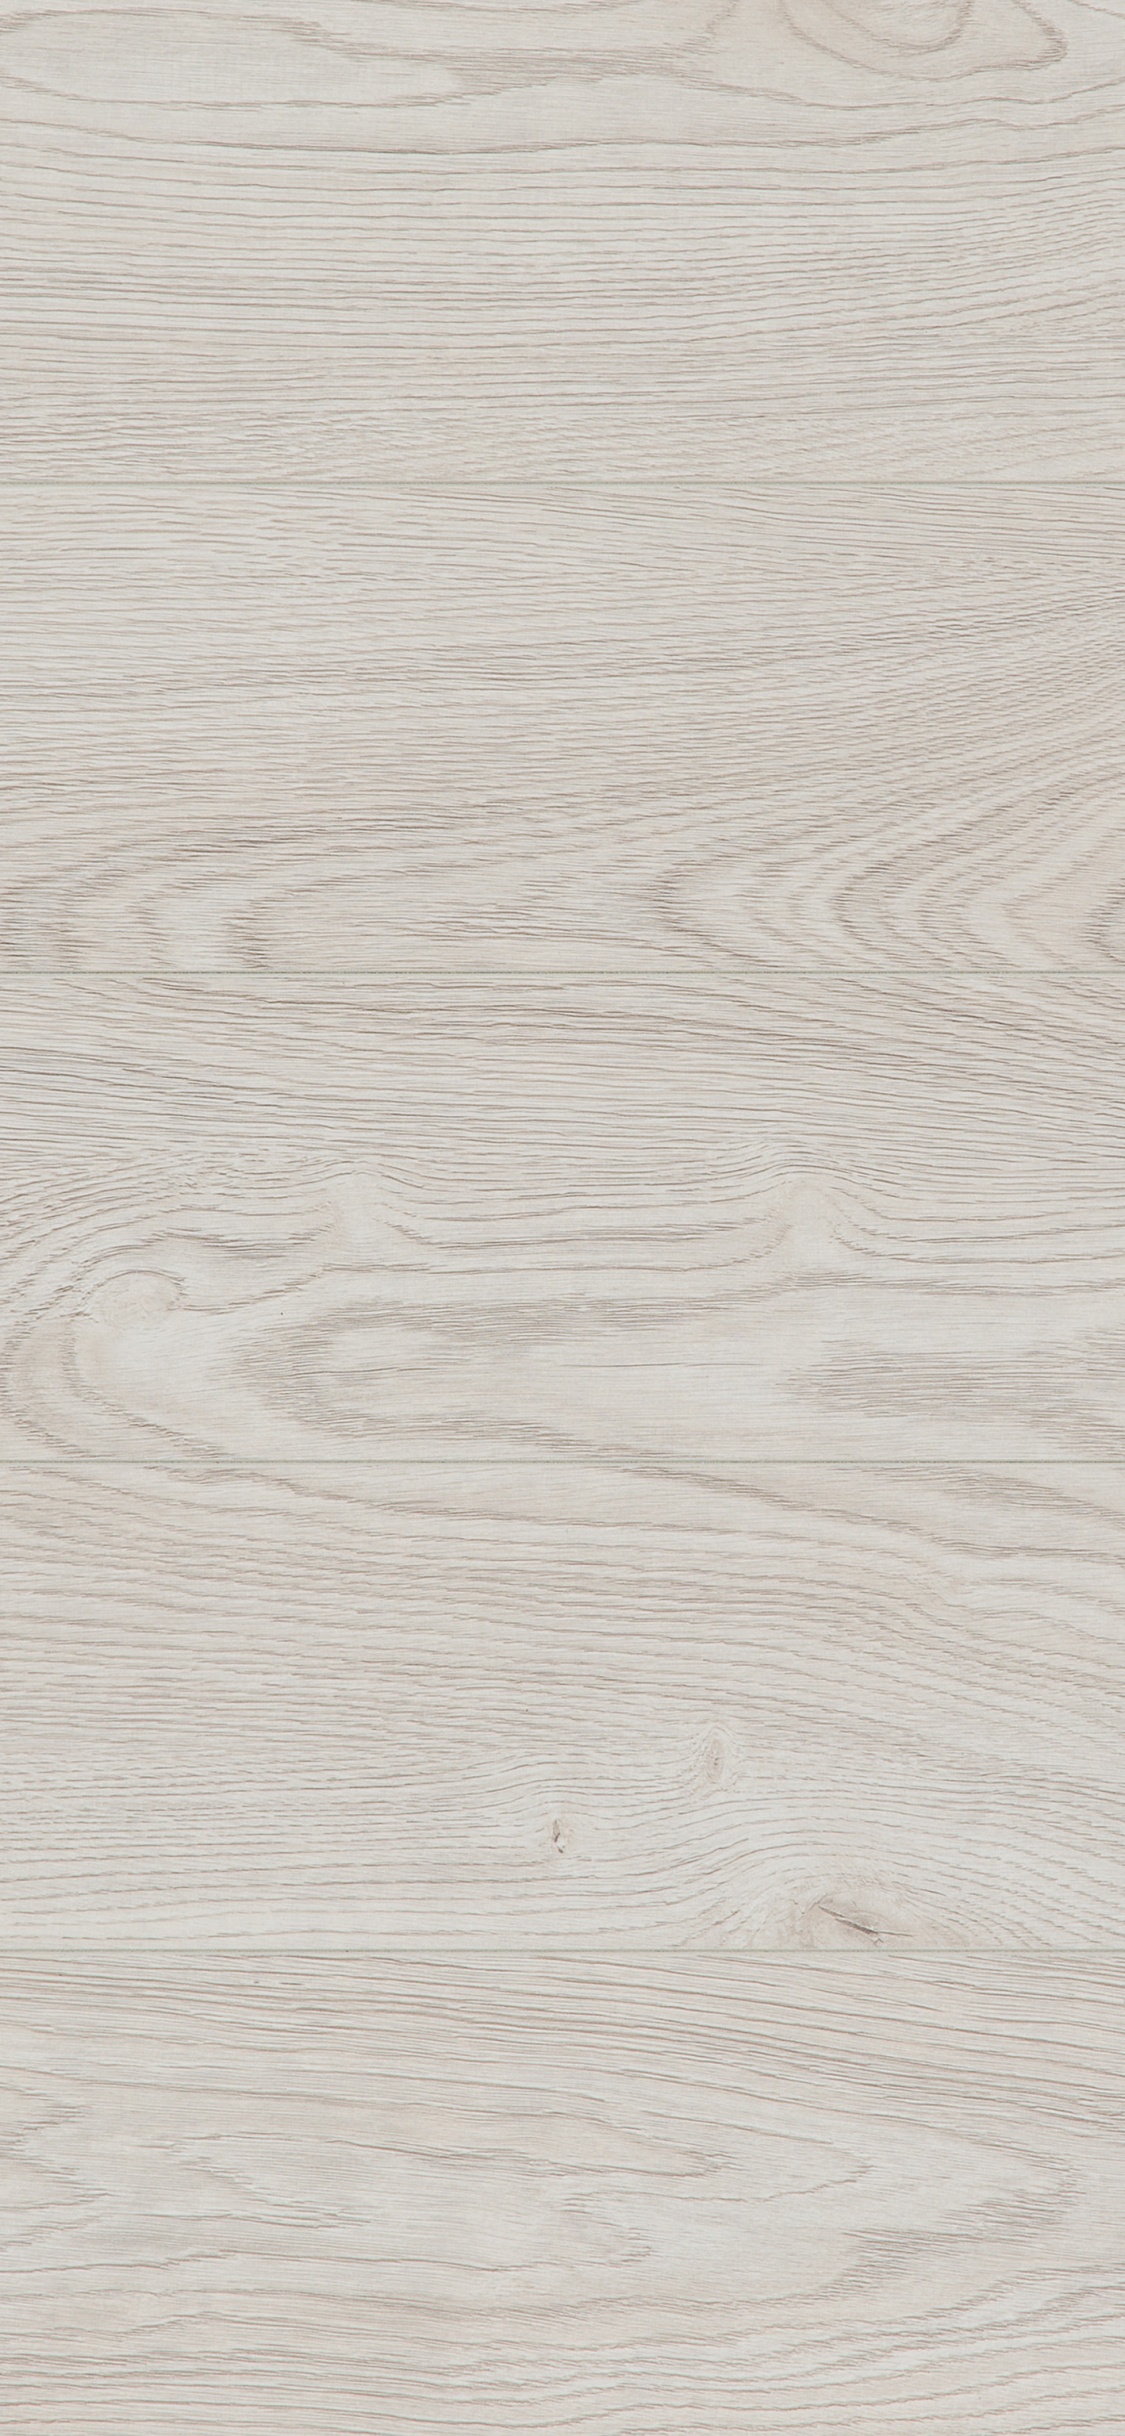 White and Brown Wooden Surface. Wallpaper in 1125x2436 Resolution